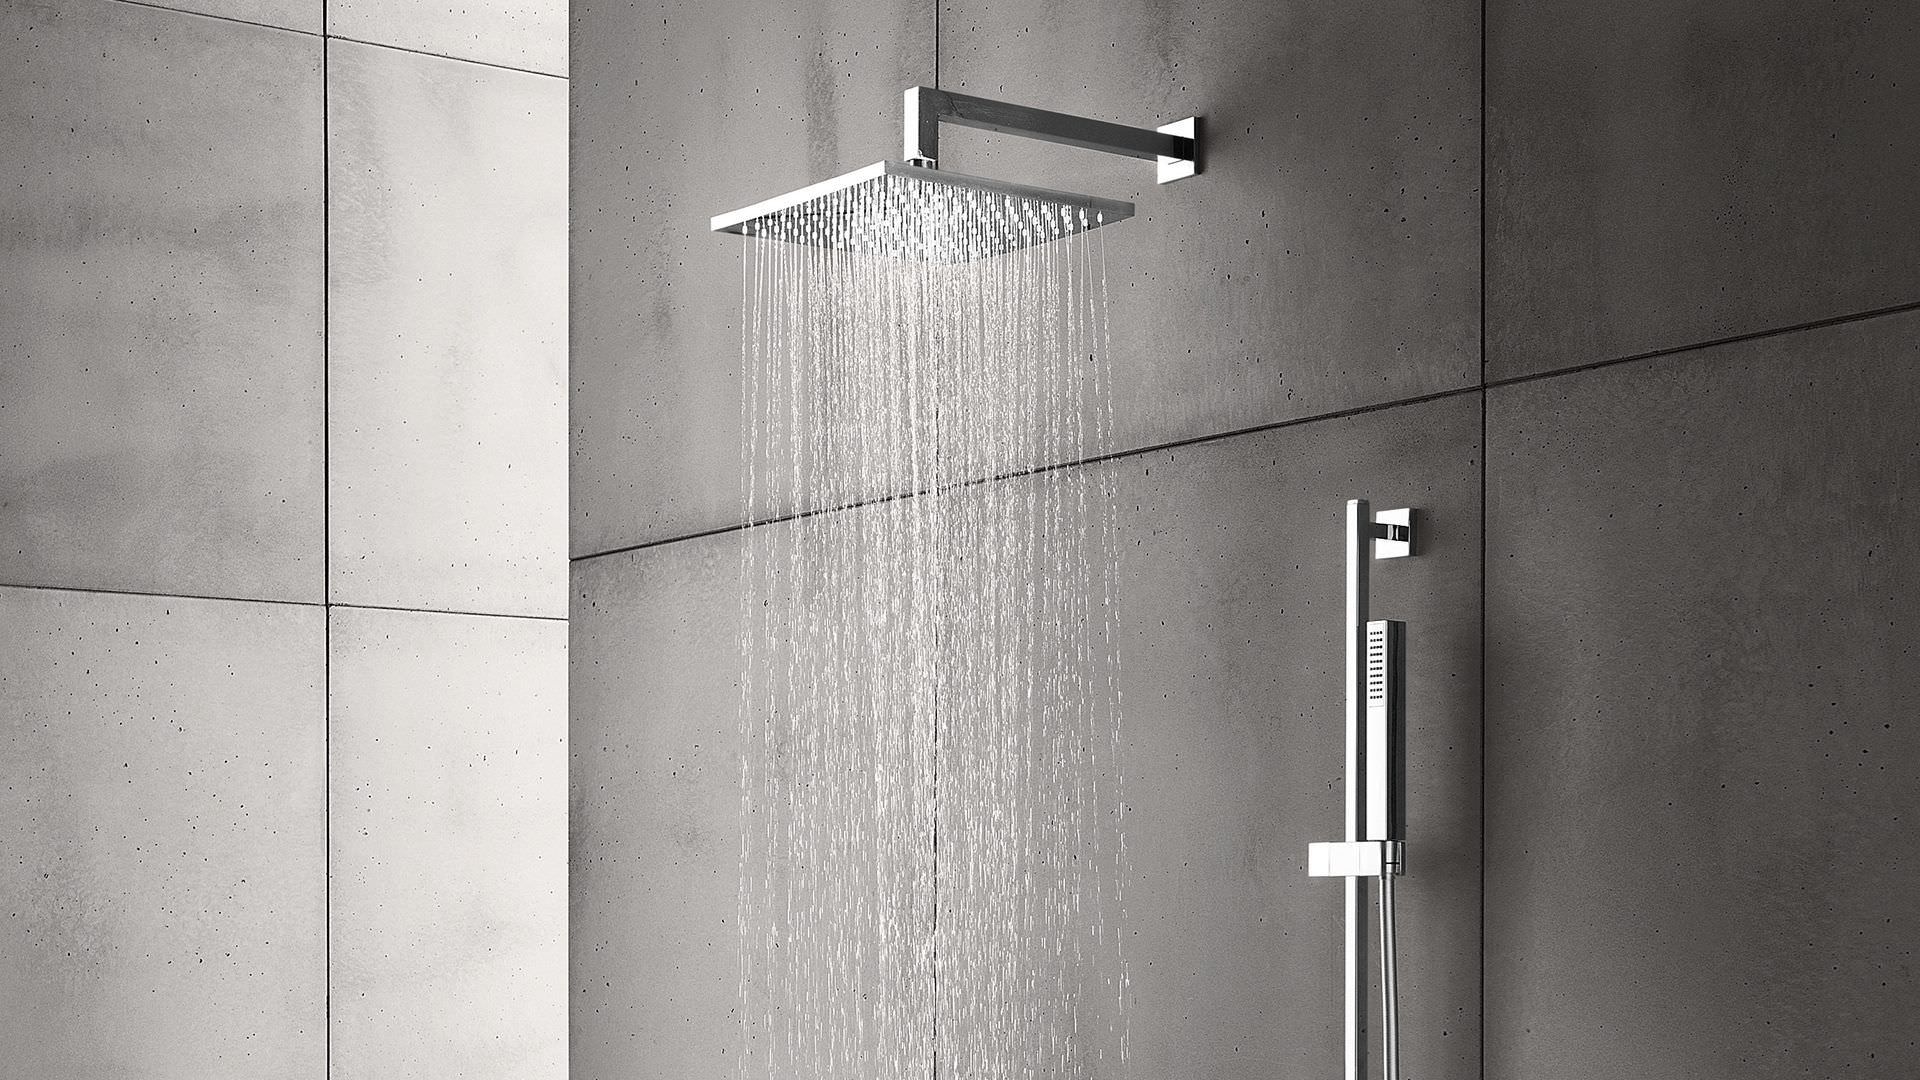 Details about   20"  Stainless Steel Square Rain Shower Head Bathroom modern style KY 